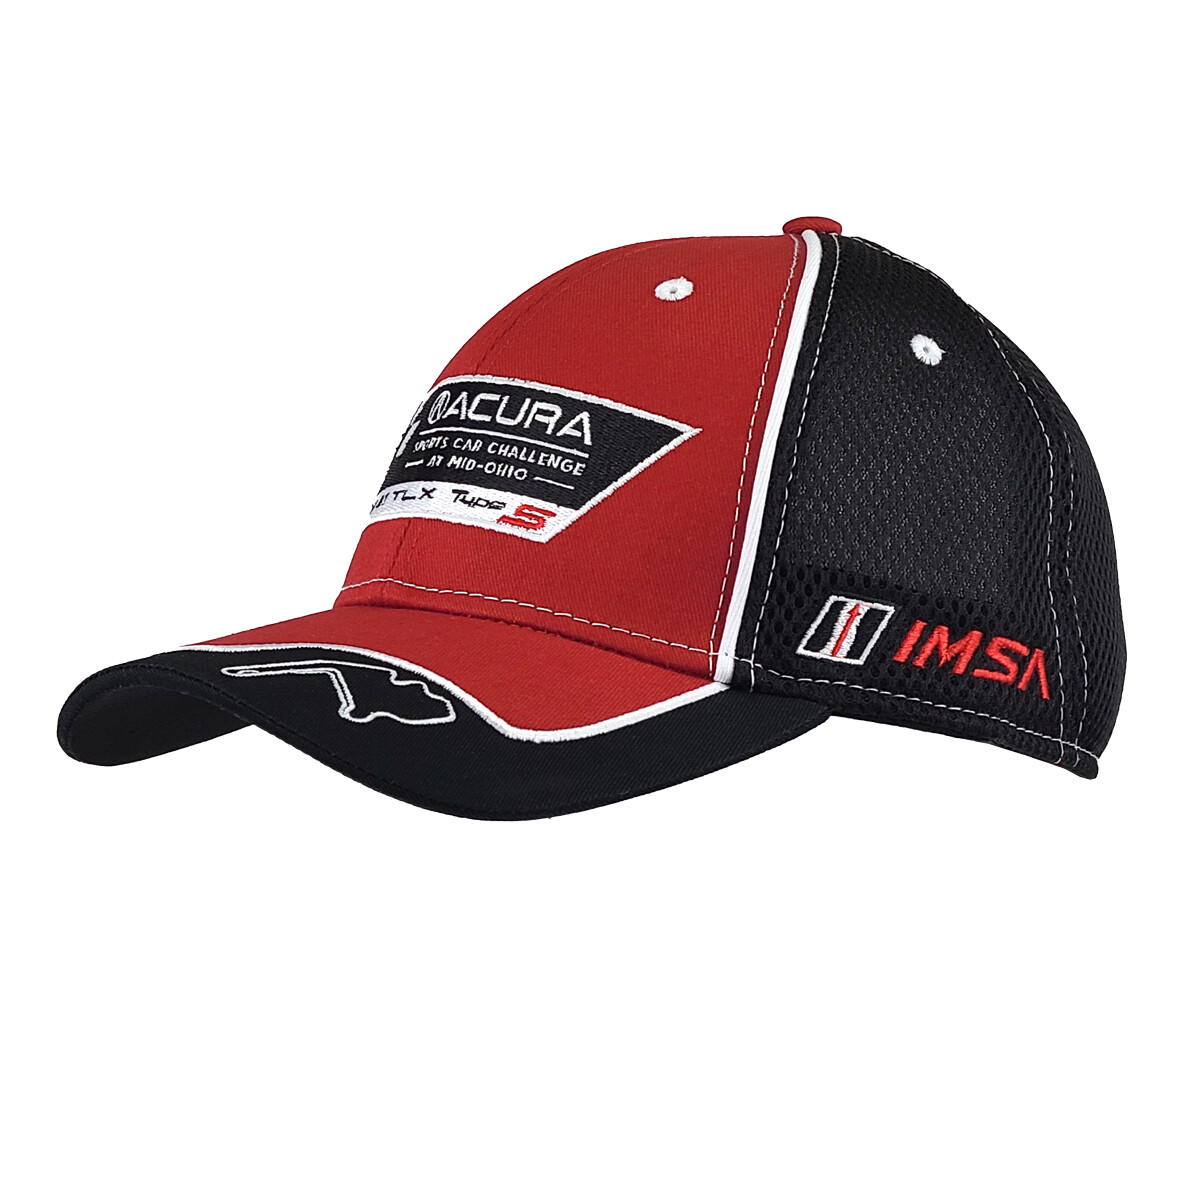 2021 Acura Event Hat - Red/Black